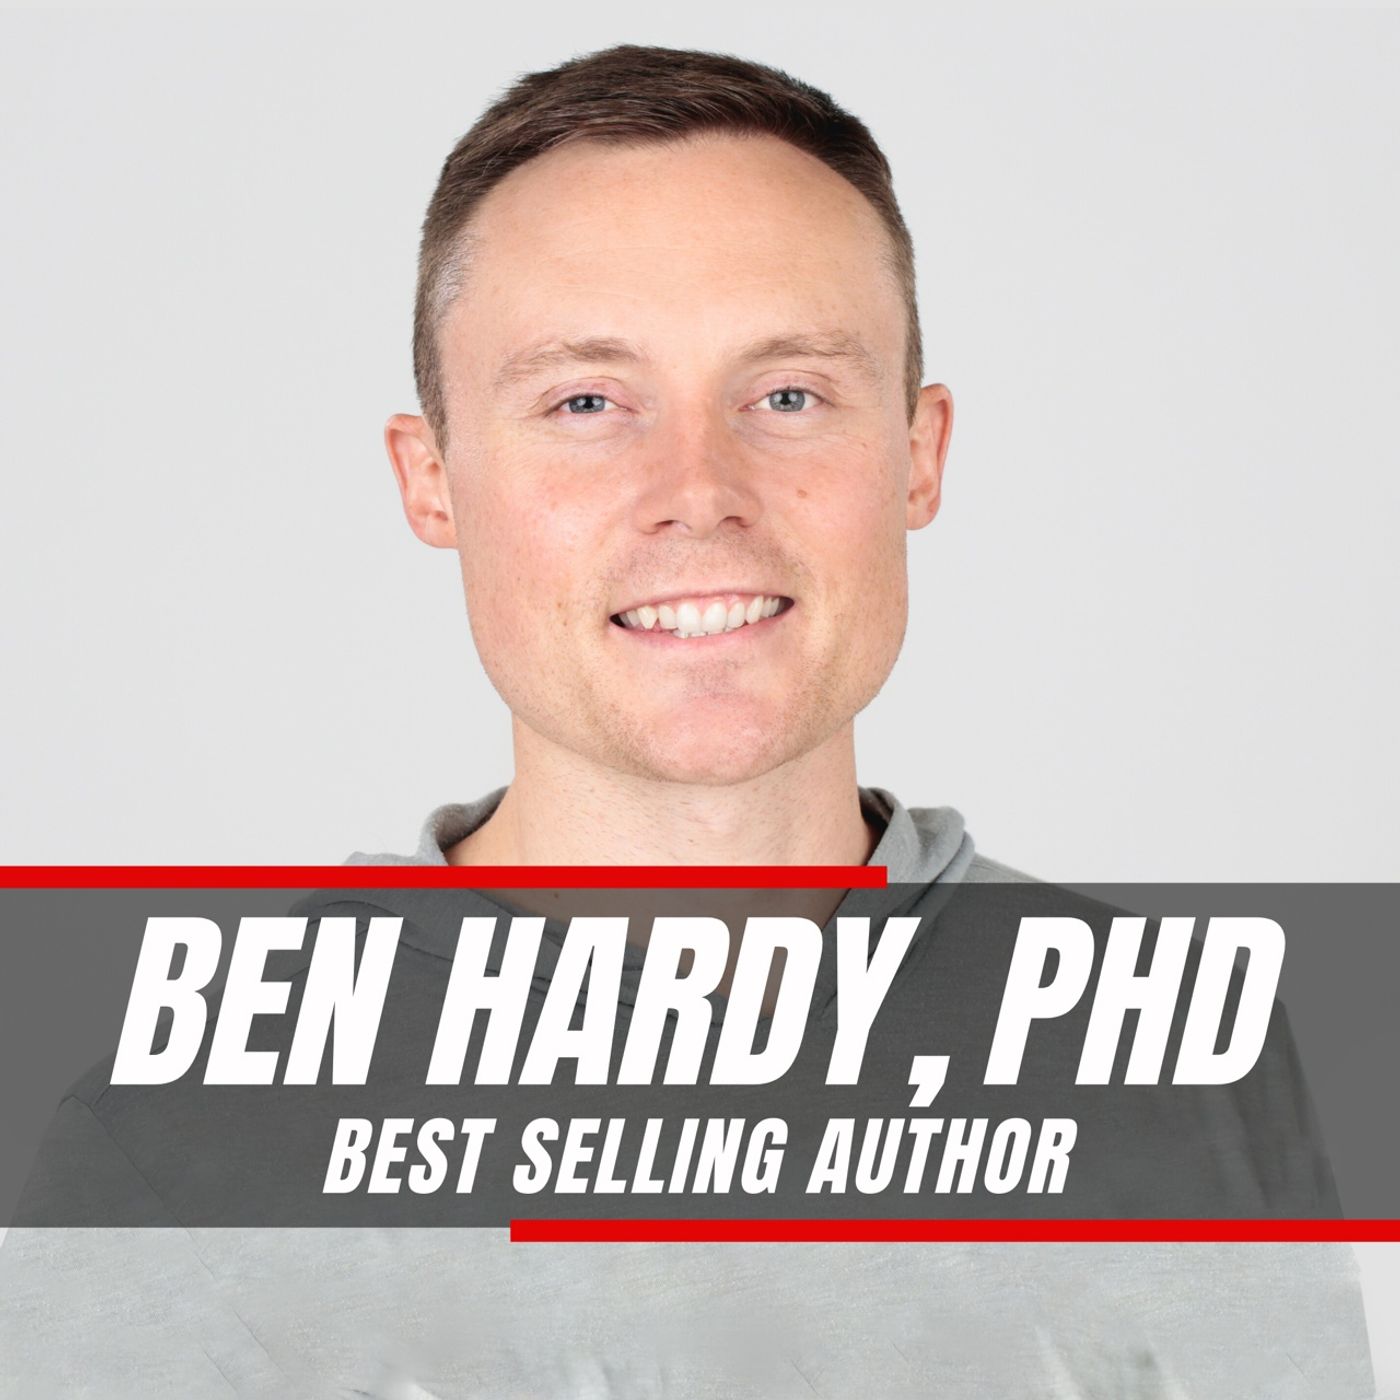 Personality Isn’t Permanent | Ben Hardy - Best Selling Author